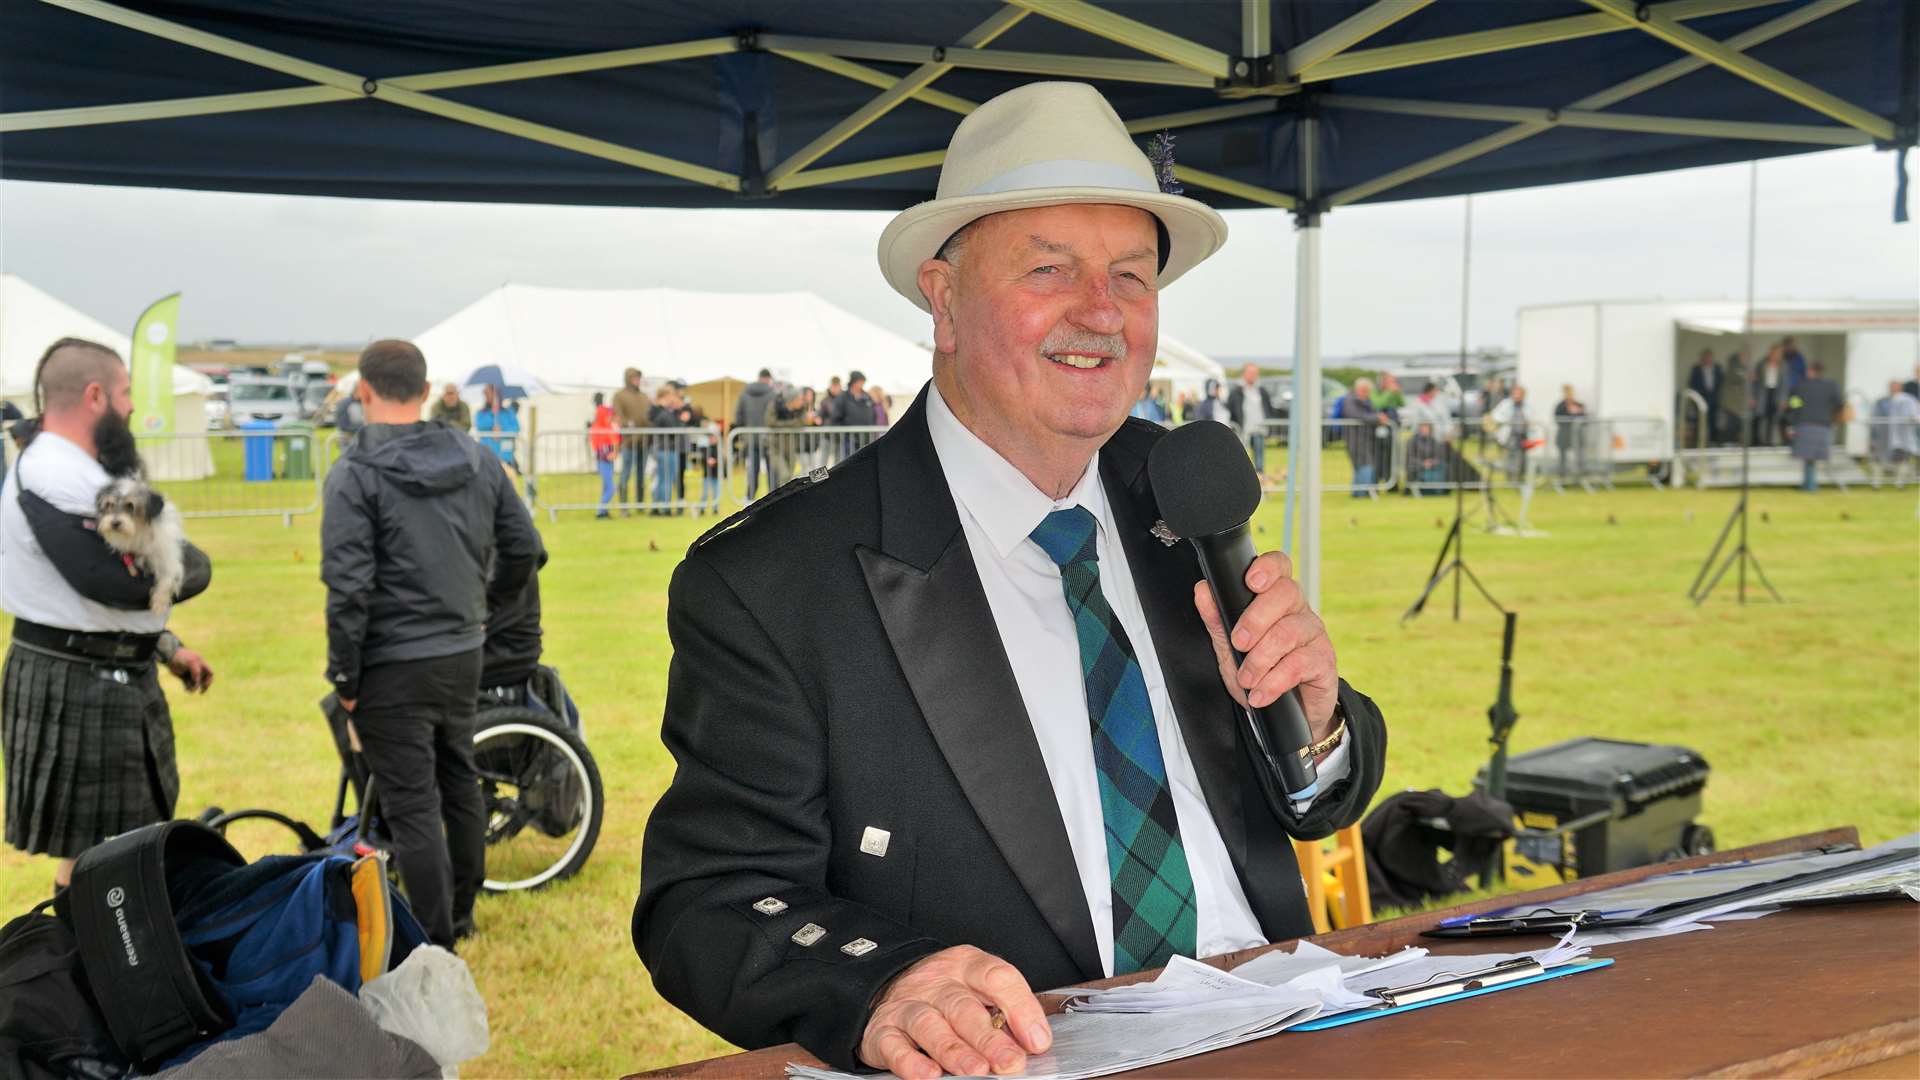 Compere Willie Mackay conducted matters with his usual jovial nature. Picture: DGS